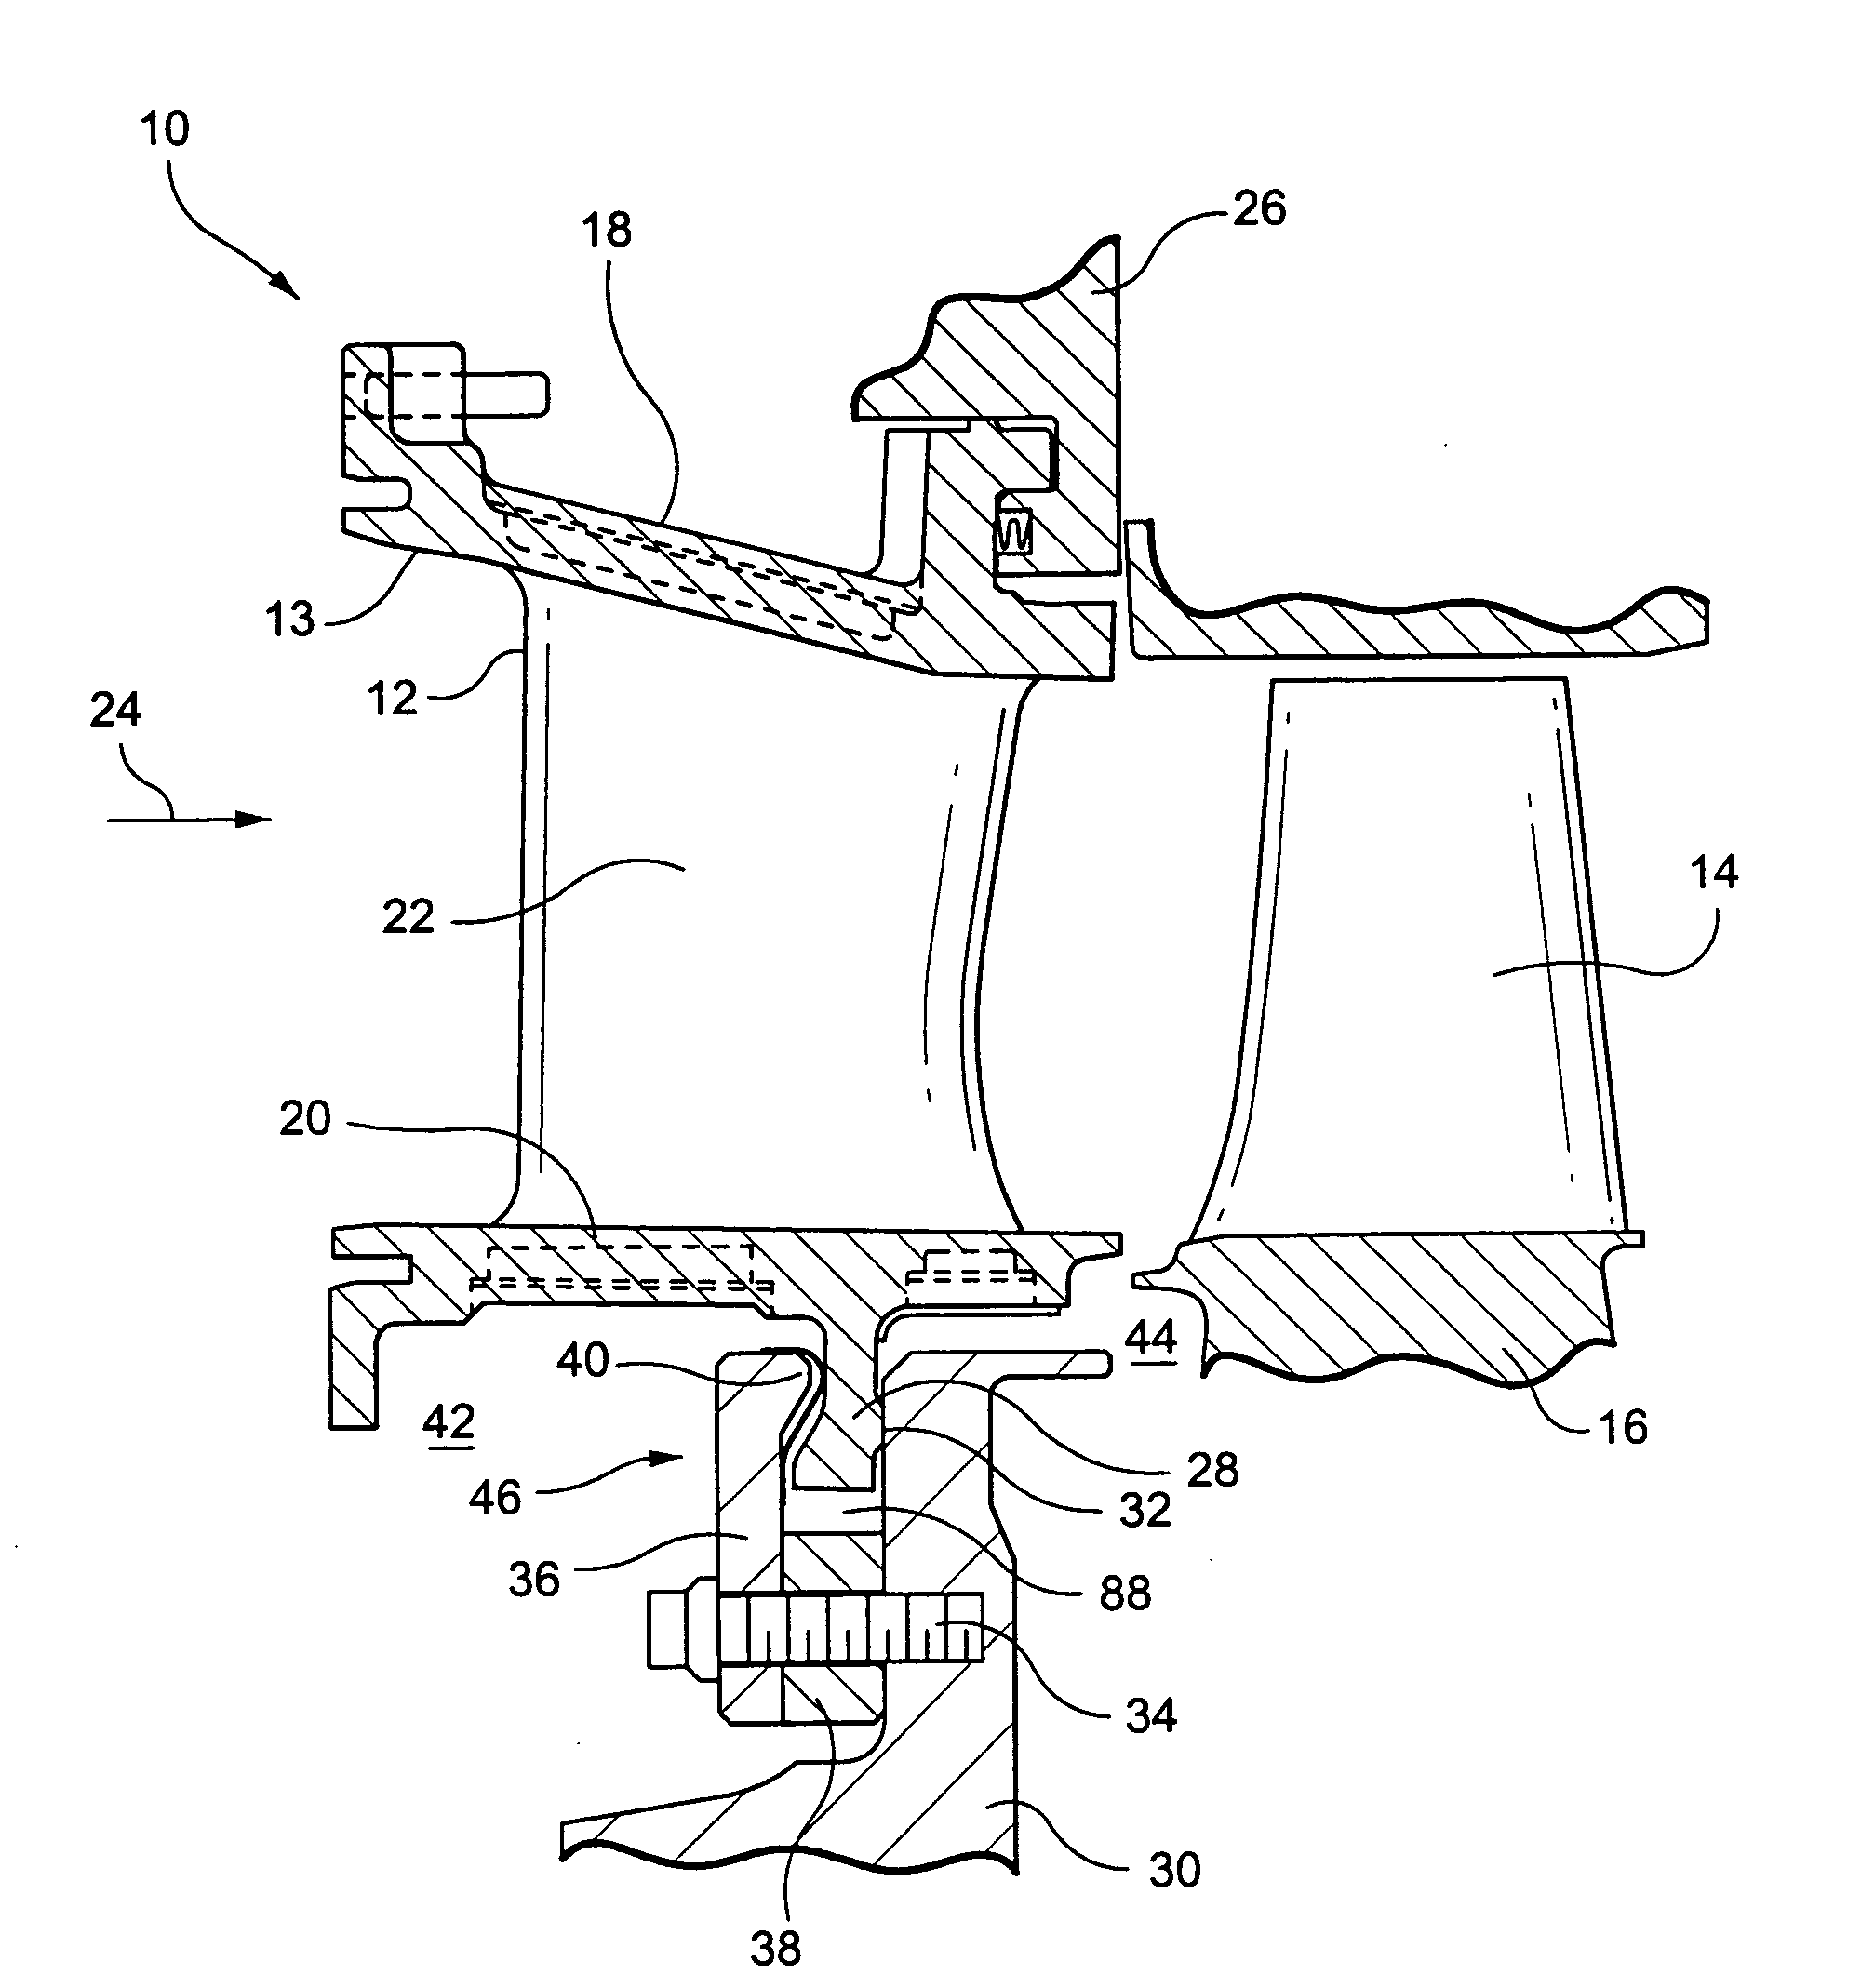 System for sealing an inner retainer segment and support ring in a gas turbine and methods therefor